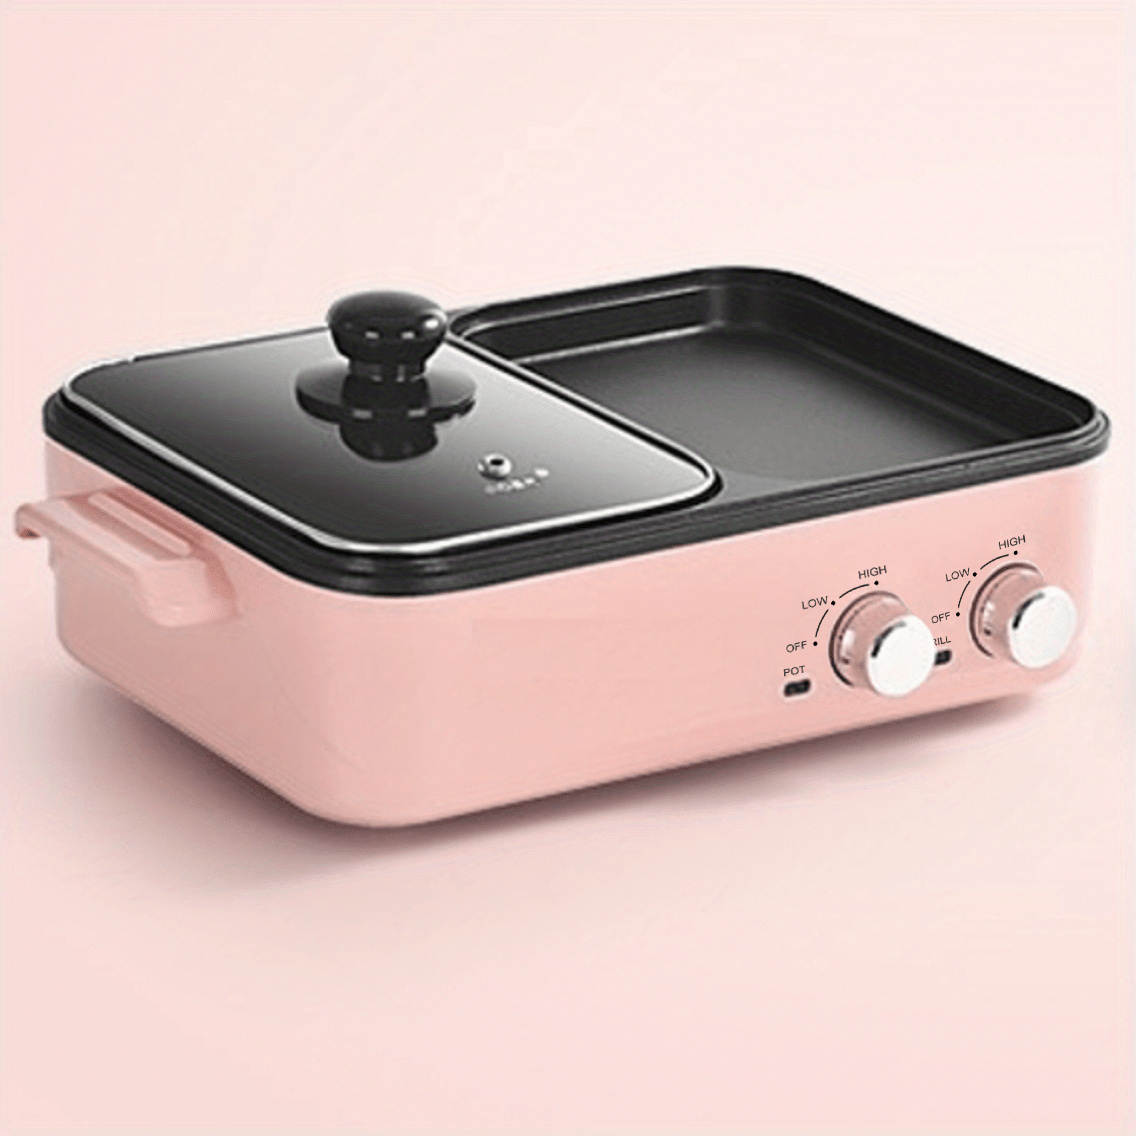 US Plug Multi Functional Household 2-in-1Electric Oven, Hot Pot Barbecue  Pan And Hot Pot, Multi-function Teppanyaki Barbecue Pan Twist Temperature  Con